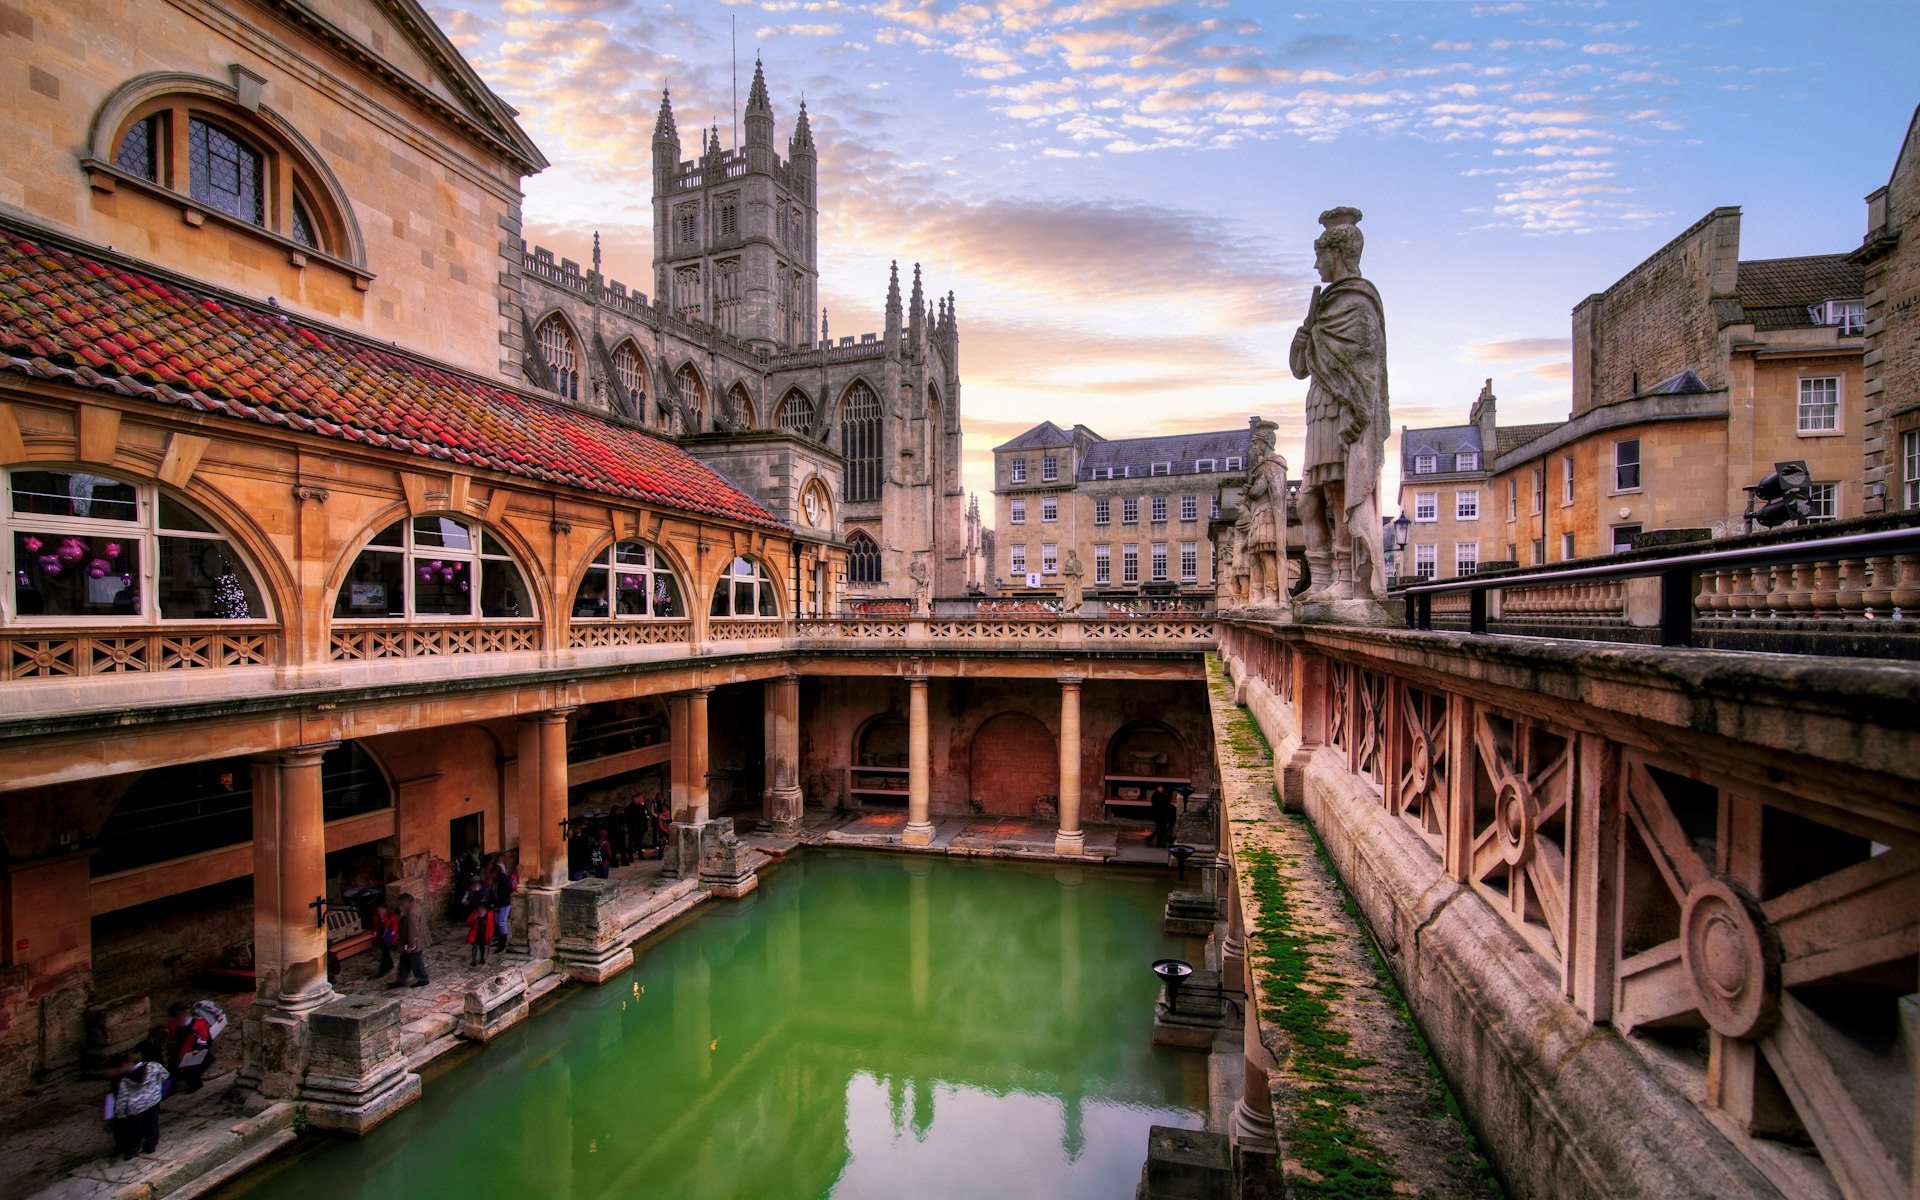 An open-air rectangular Roman bath filled with green water surrounded by a colonnaded walkway lined with statues 